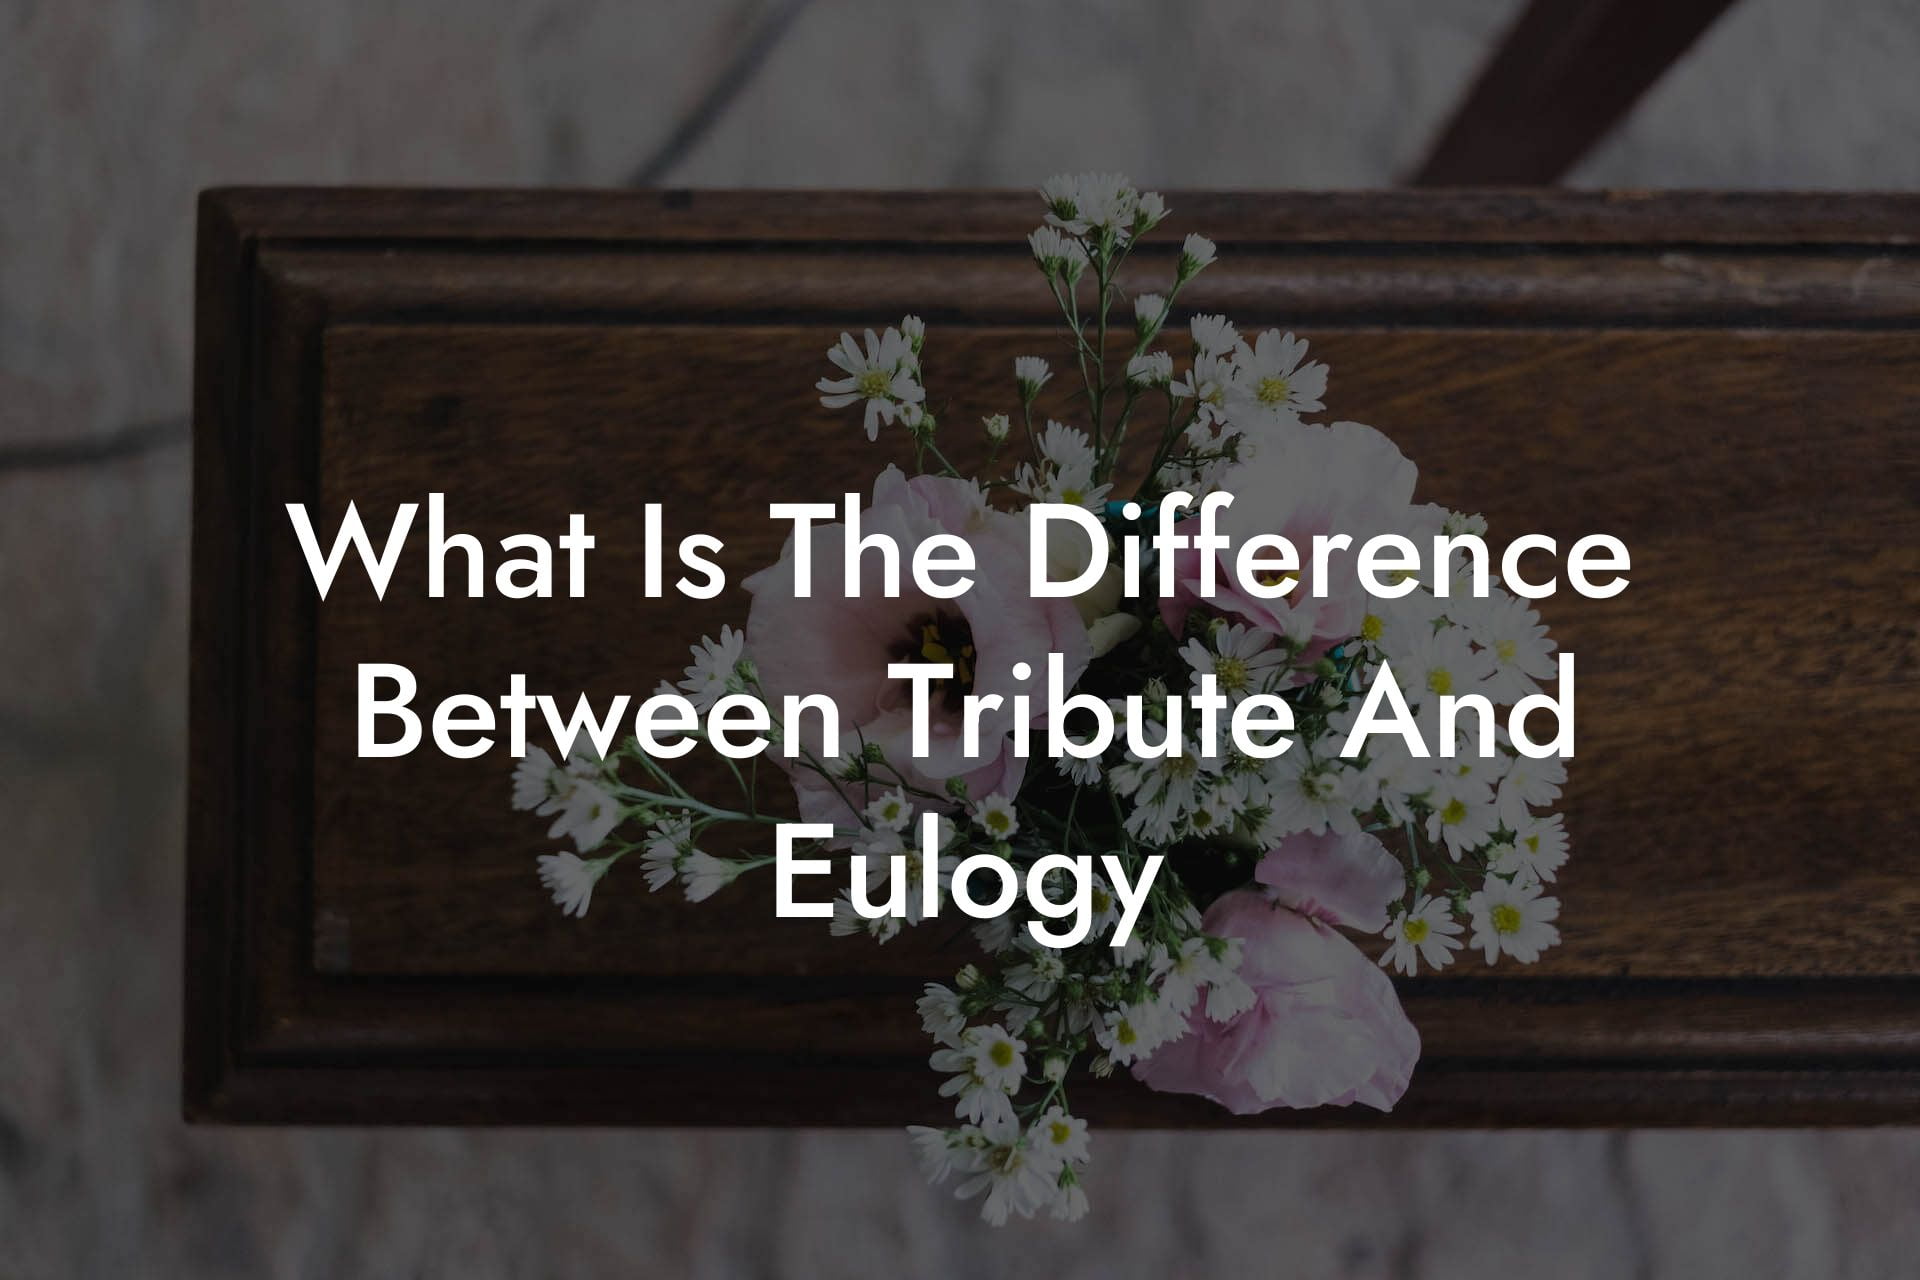 What Is The Difference Between Tribute And Eulogy